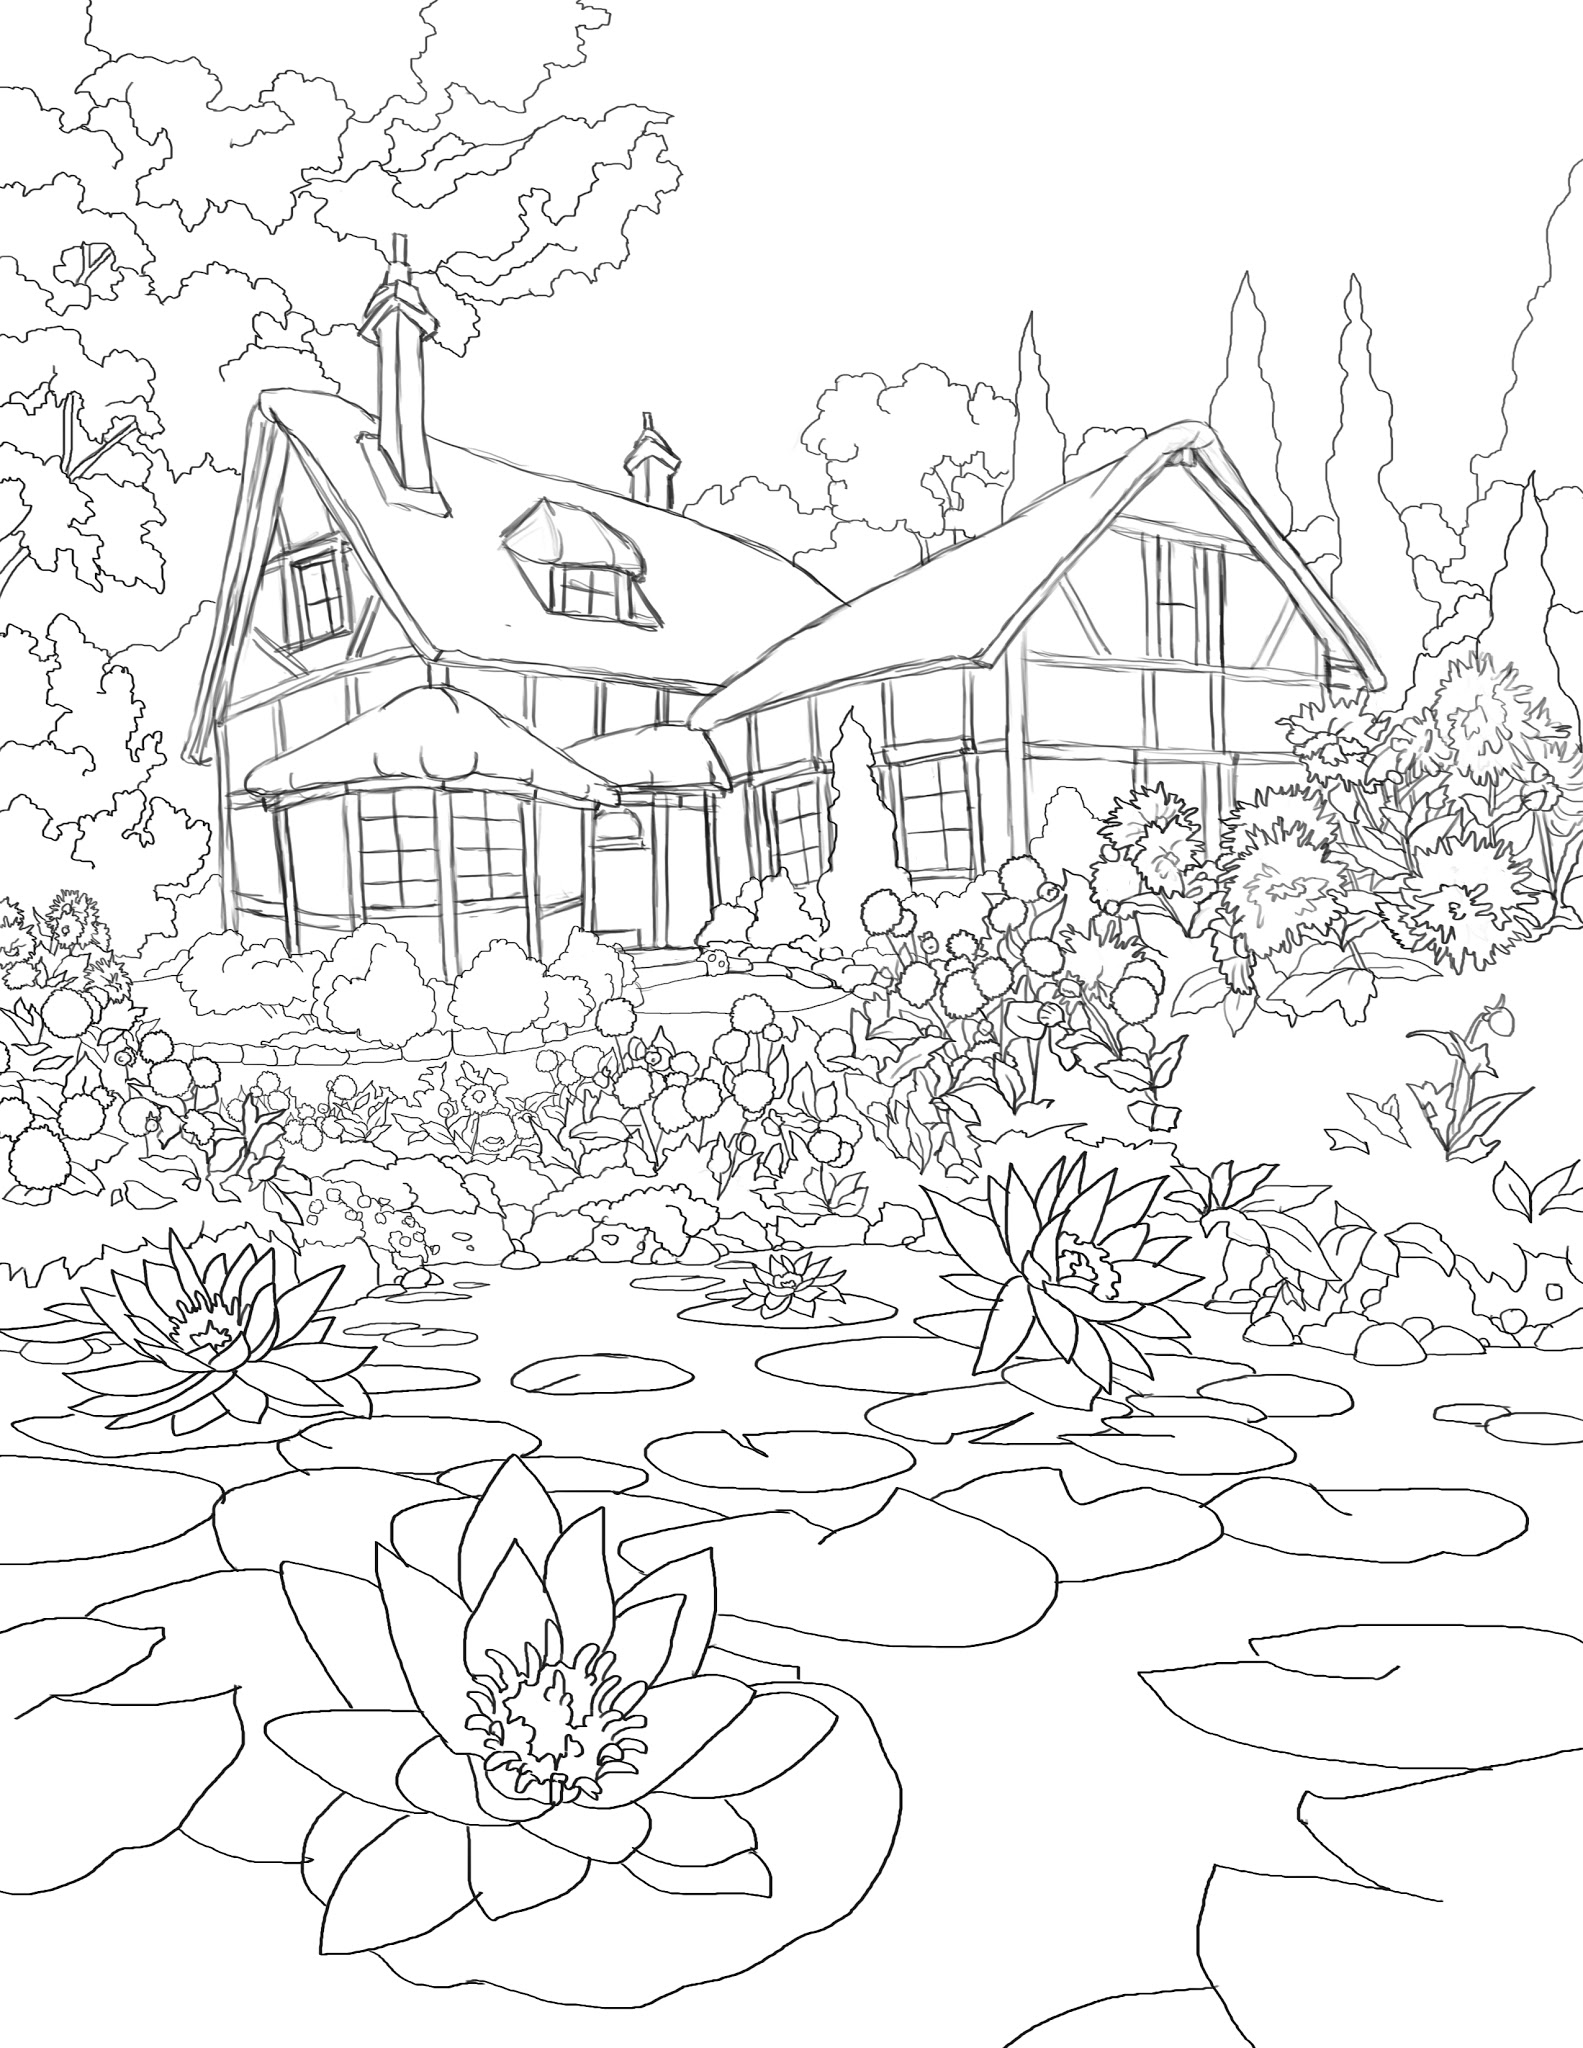 365-days-of-coloring-cottage-pond